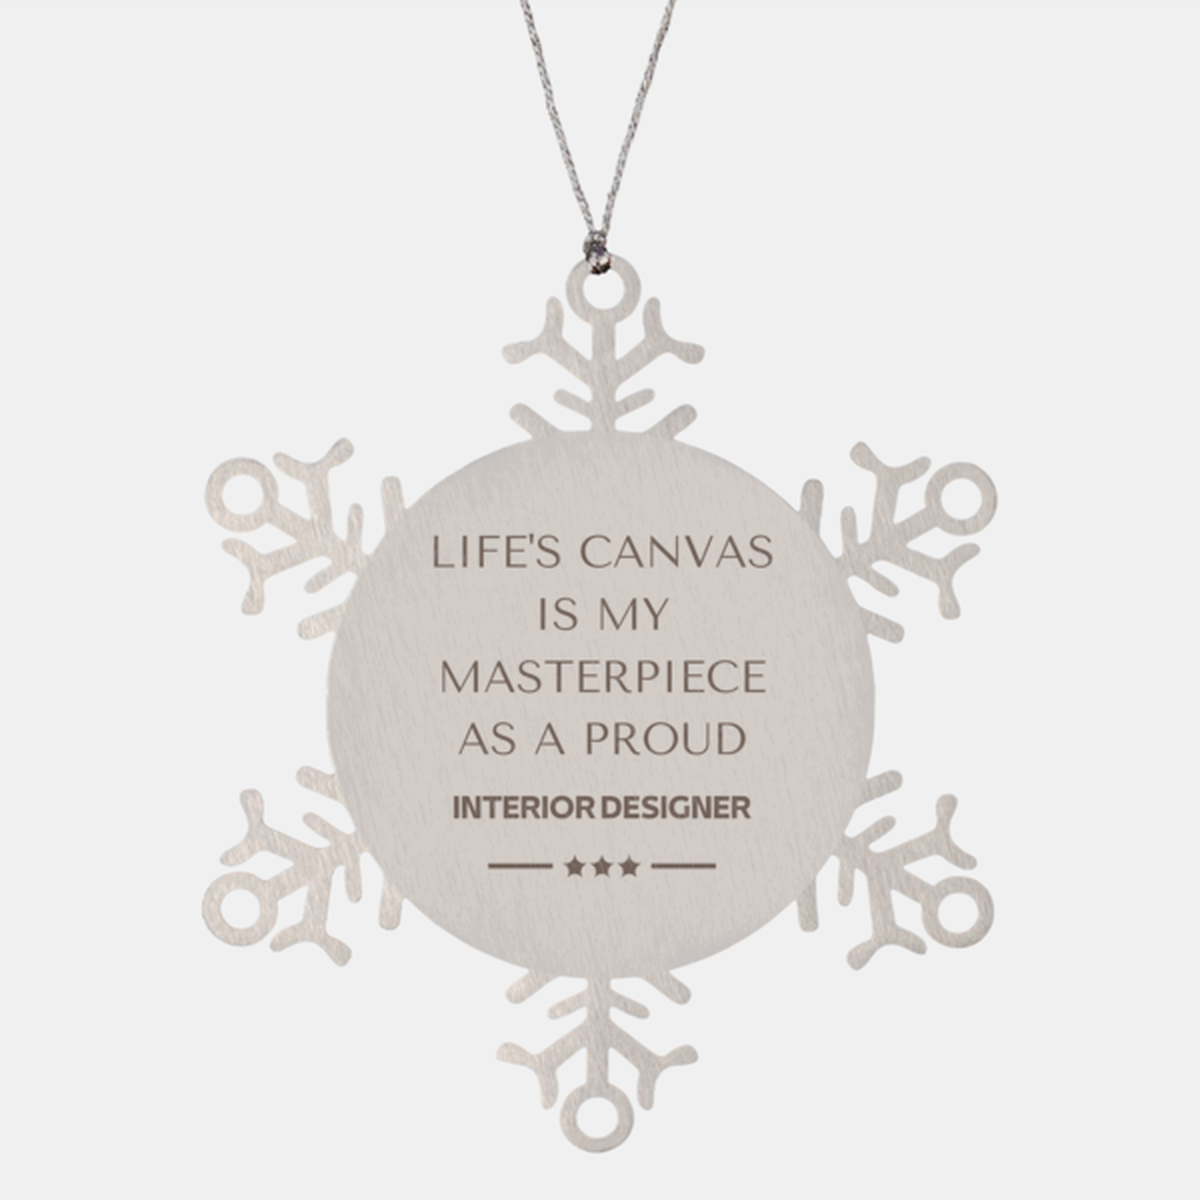 Proud Interior Designer Gifts, Life's canvas is my masterpiece, Epic Birthday Christmas Unique Snowflake Ornament For Interior Designer, Coworkers, Men, Women, Friends